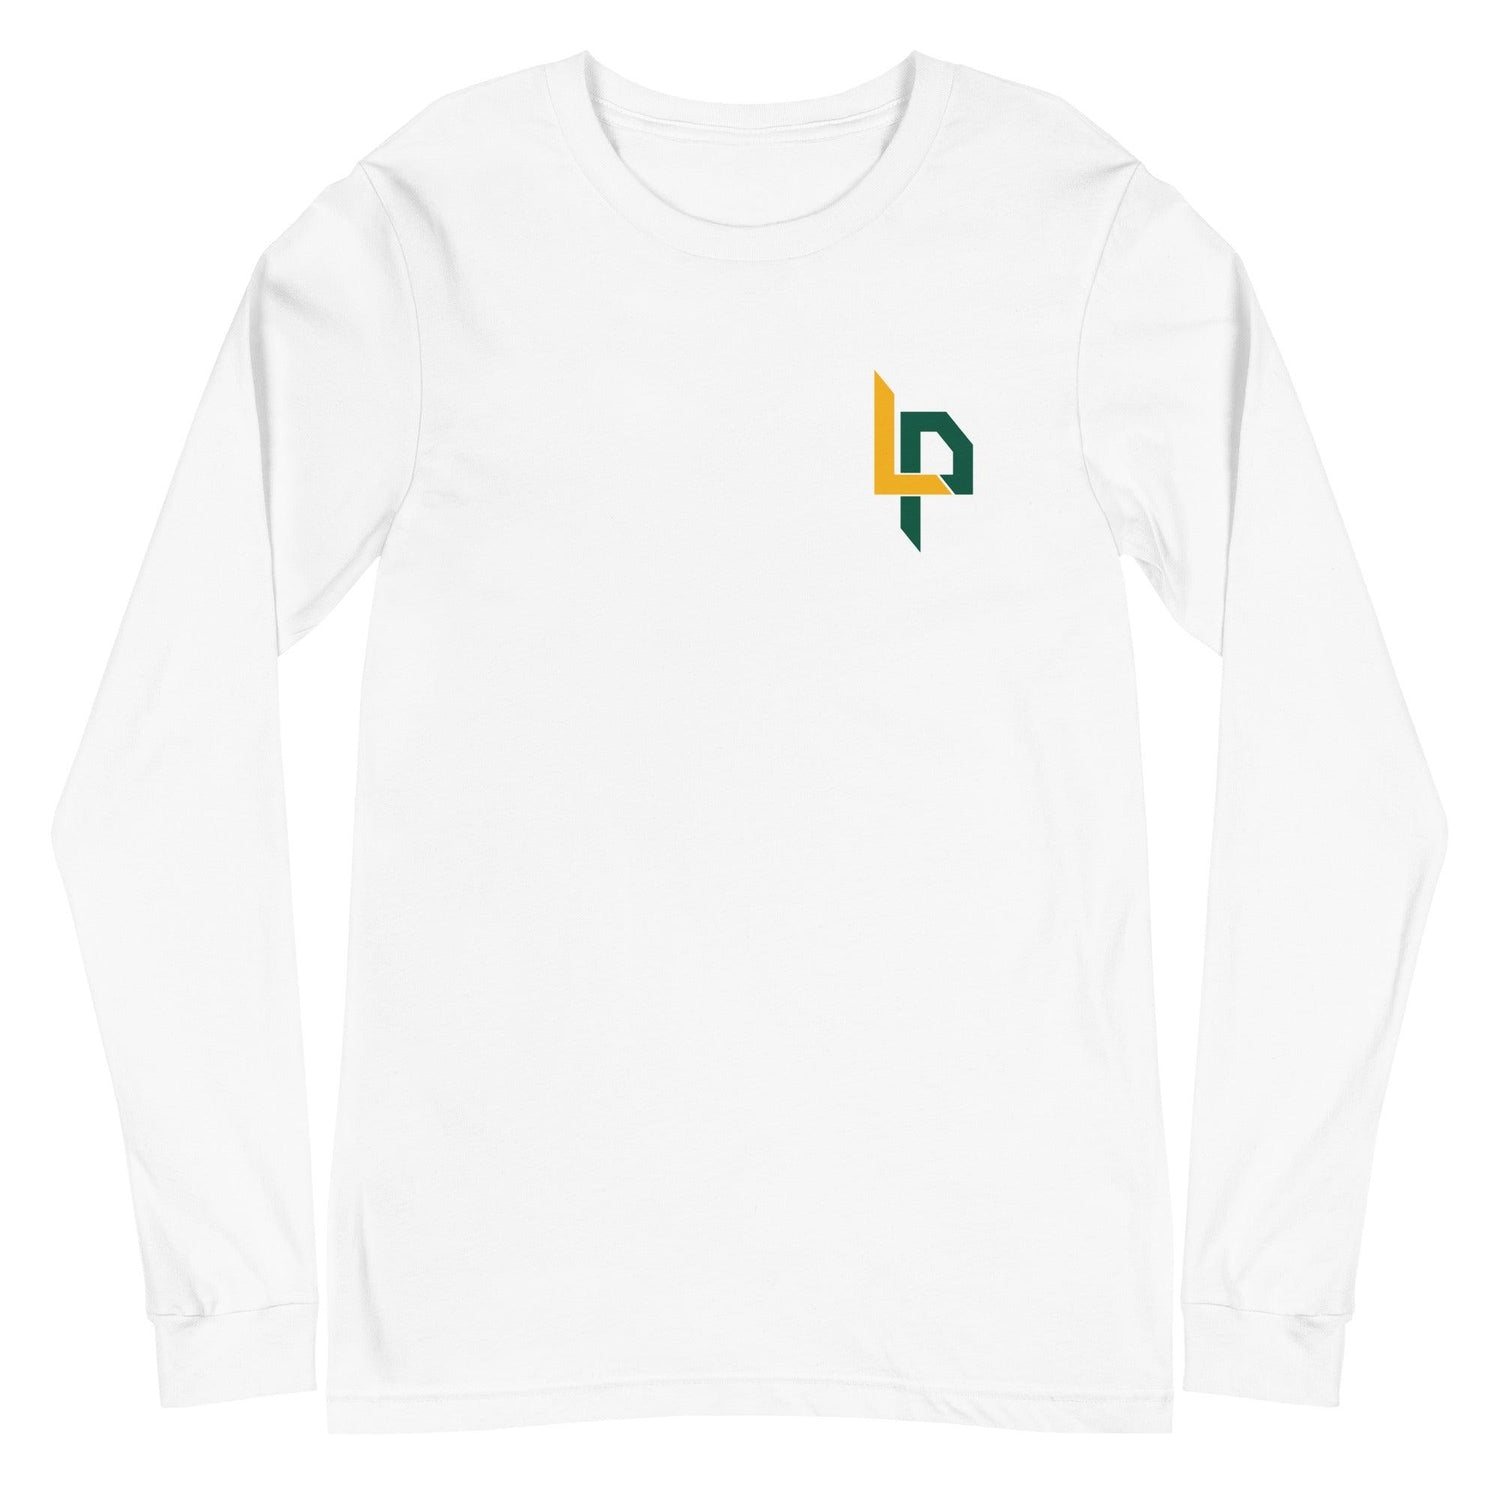 Lachlan Pitts "Essential" Long Sleeve Tee - Fan Arch